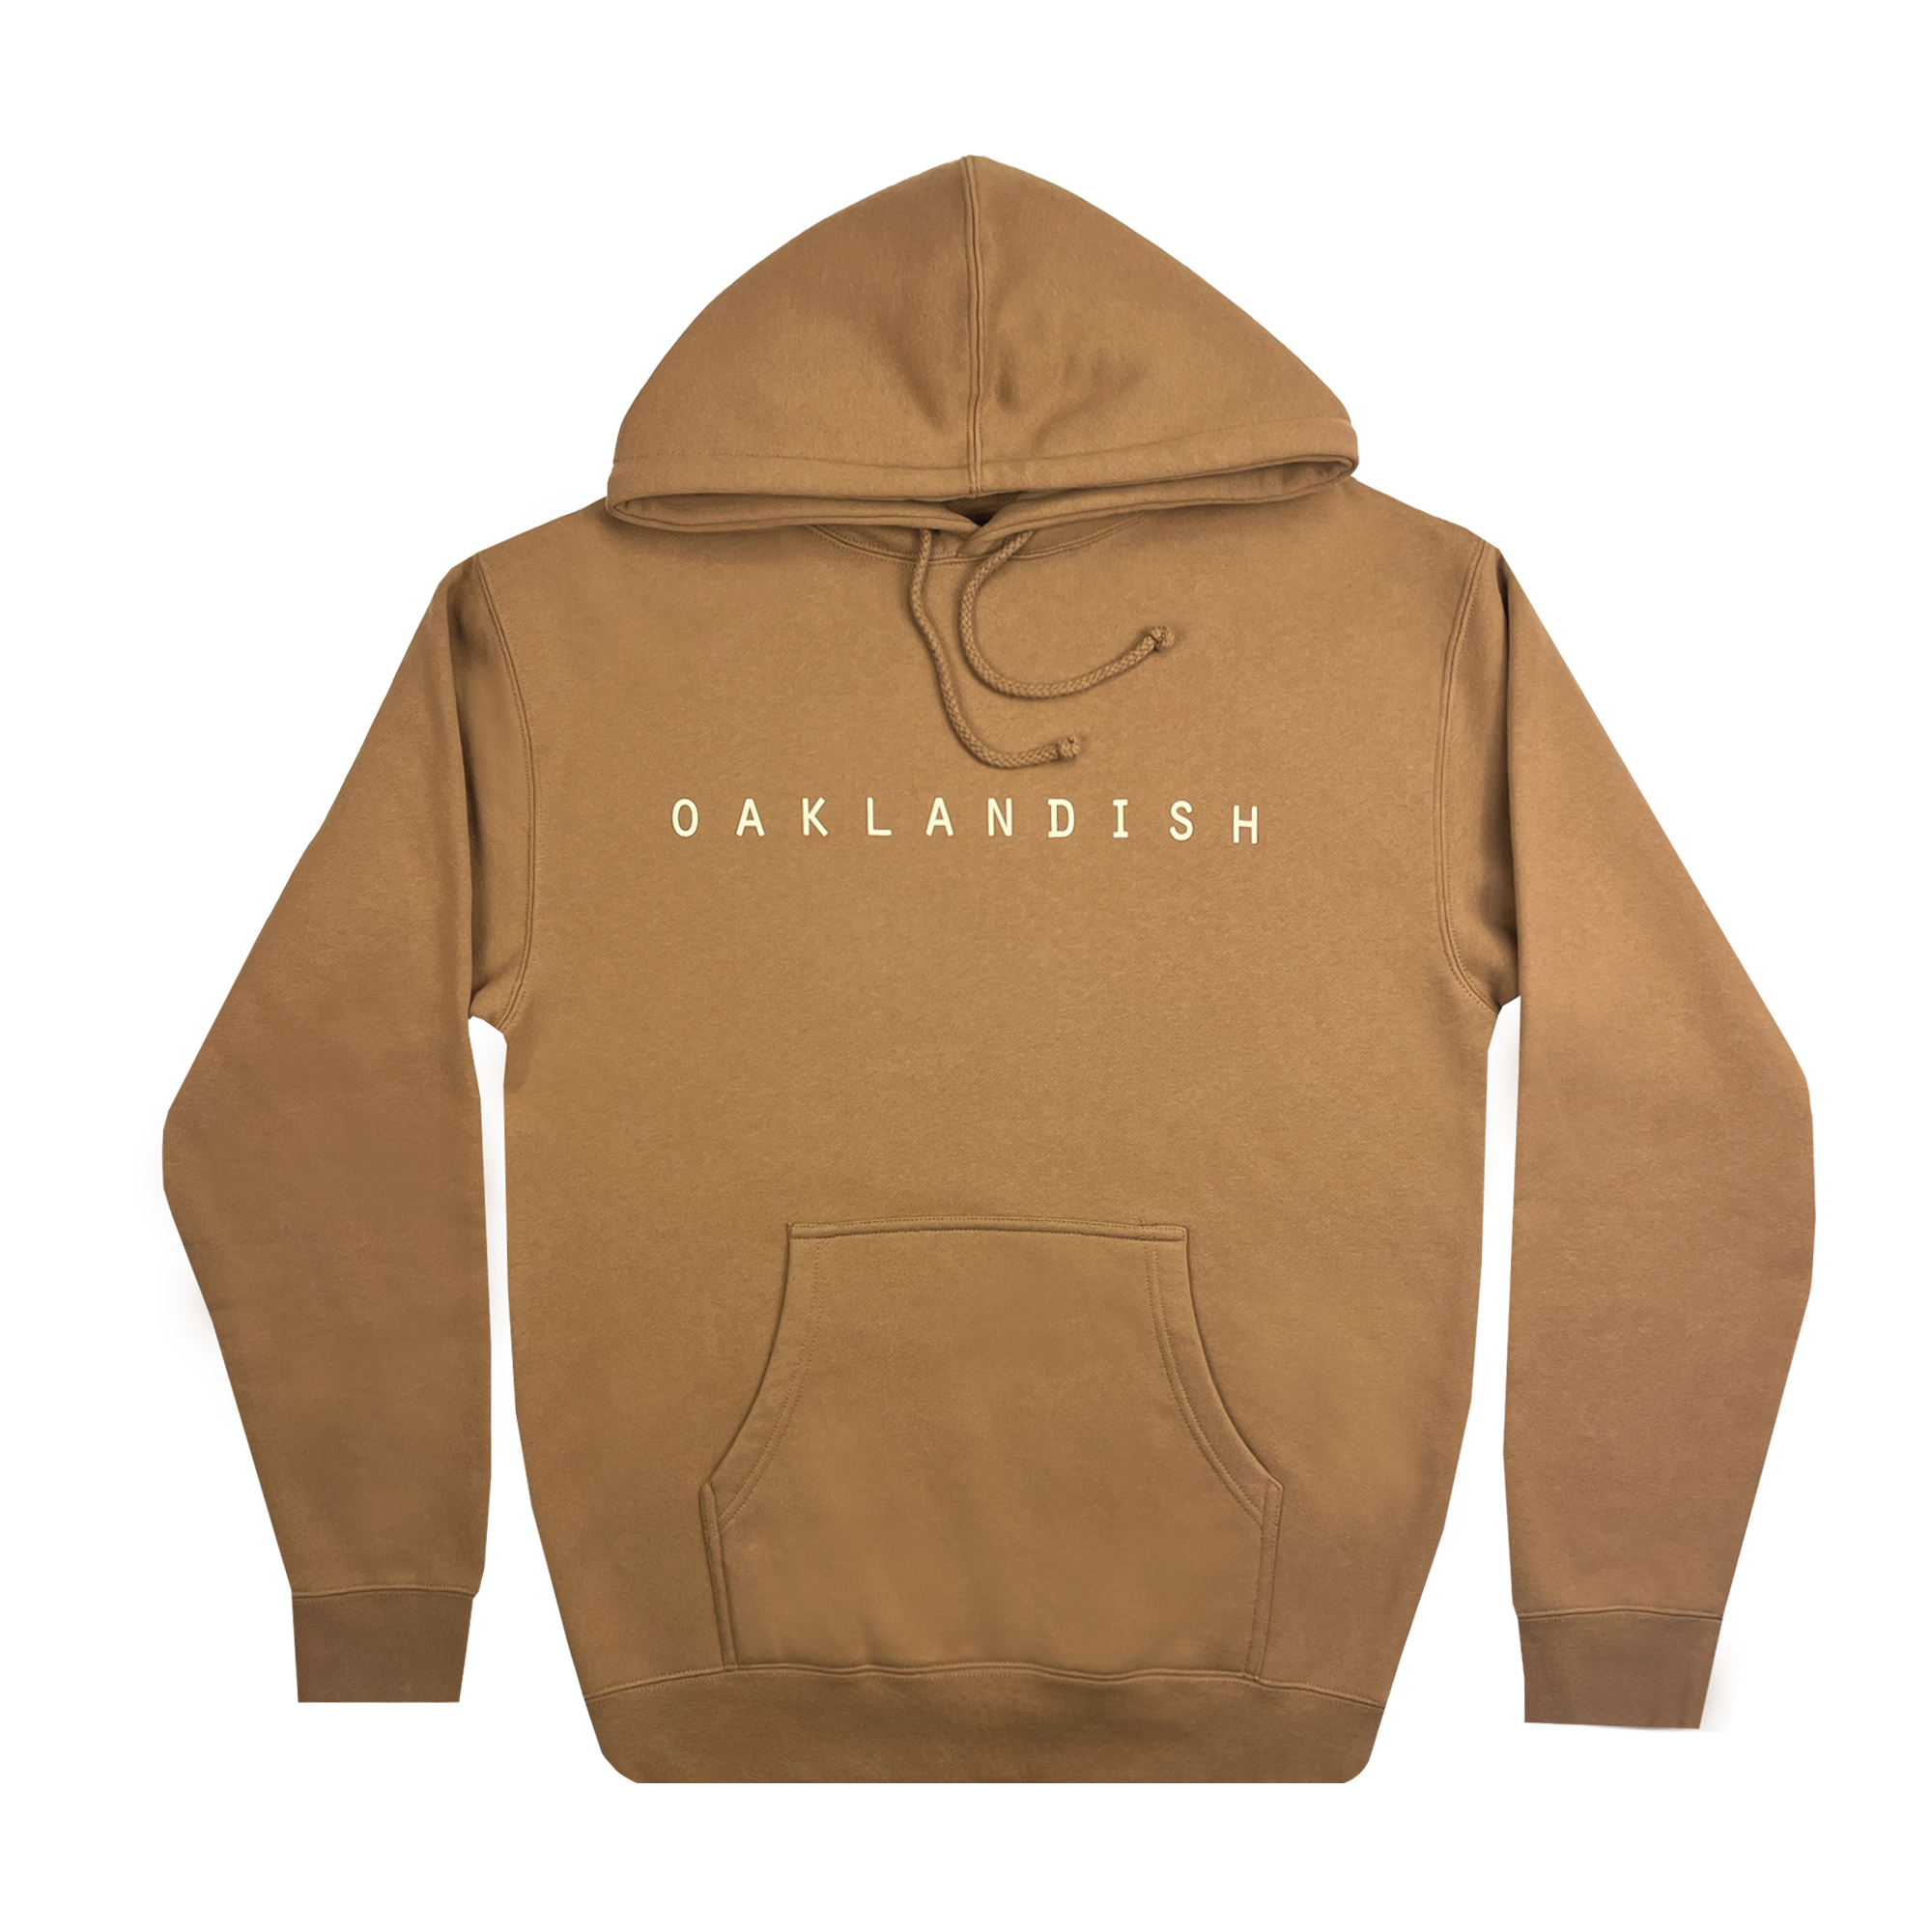 Front view of Premium pullover Hoodie - Classic Oaklandish, Saddle brown.